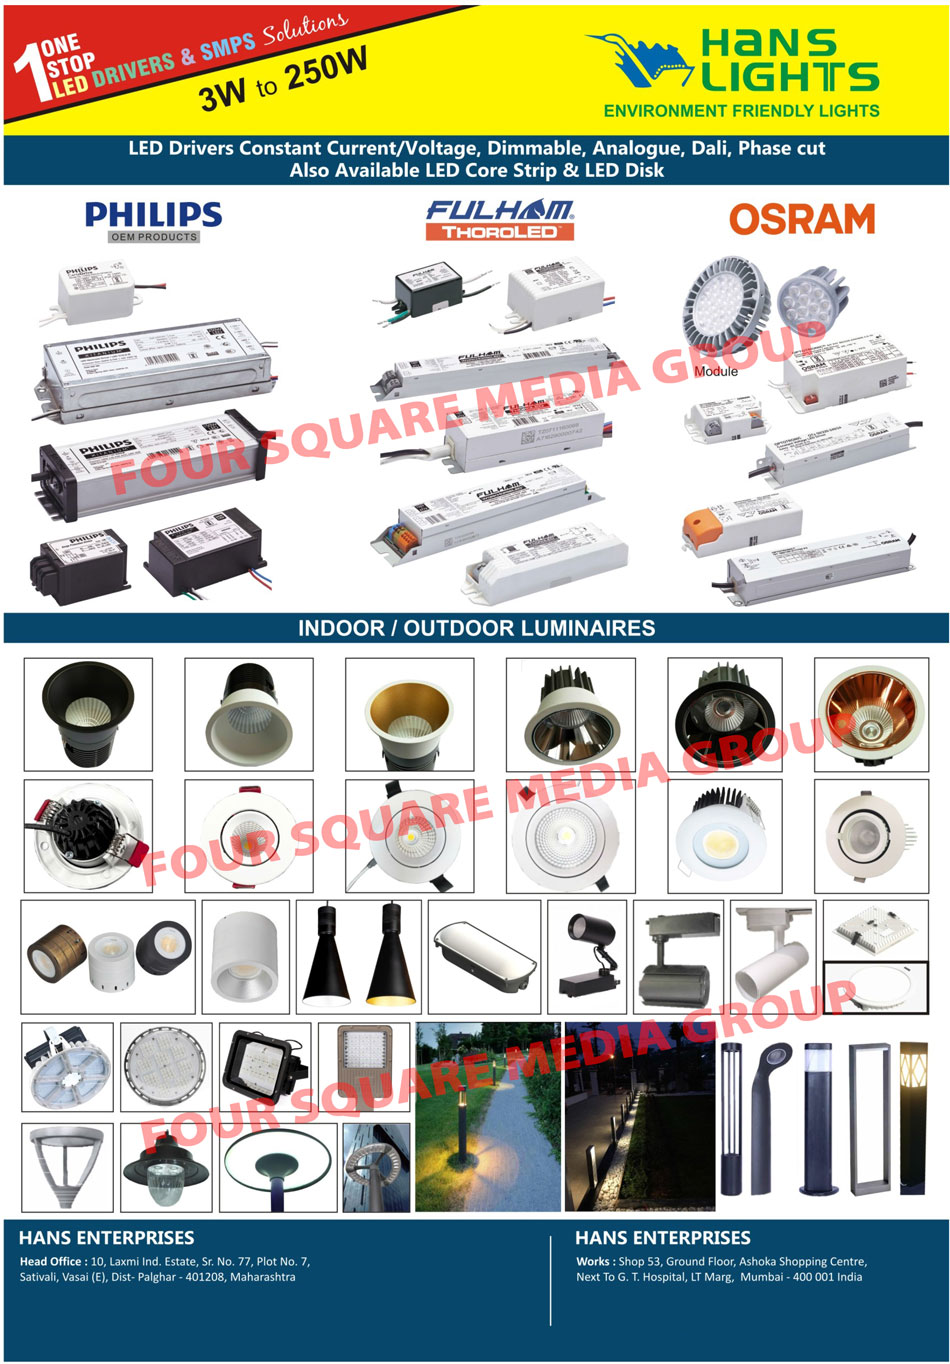 Led Disks, DLM, Distributed lock manager, Led Drivers, LED line Core, Led lights, Led Down Lights, Mid Bay Led Lights, LED High Bay Lights, Led Middle Diffuser Downlights, Led Top Diffuser Down Lights, Led Spot Lights, Led Down Lights, Led Pendant Lights, Moveable Led Down Lights, Led Track Lights, LED Surface Lights, Recessed Led Luminaries, Compact Led Downlights, DLM Down Lights, Led Surface DLM Lights, Bollard Lights, Post Top Luminaires, Down Lights, Electrical Products, Electrical Items, Moveable Downlights, Pollard Lights, Led Core Strips, Led Disk, Led Drivers, Constant Current Led Drivers, Constant Voltage Led Drivers, Dimmable Led Drivers, Dali Led Drivers, Phase Cut Led Drivers, Led Module, Indoor Luminaries, Outdoor Luminaries